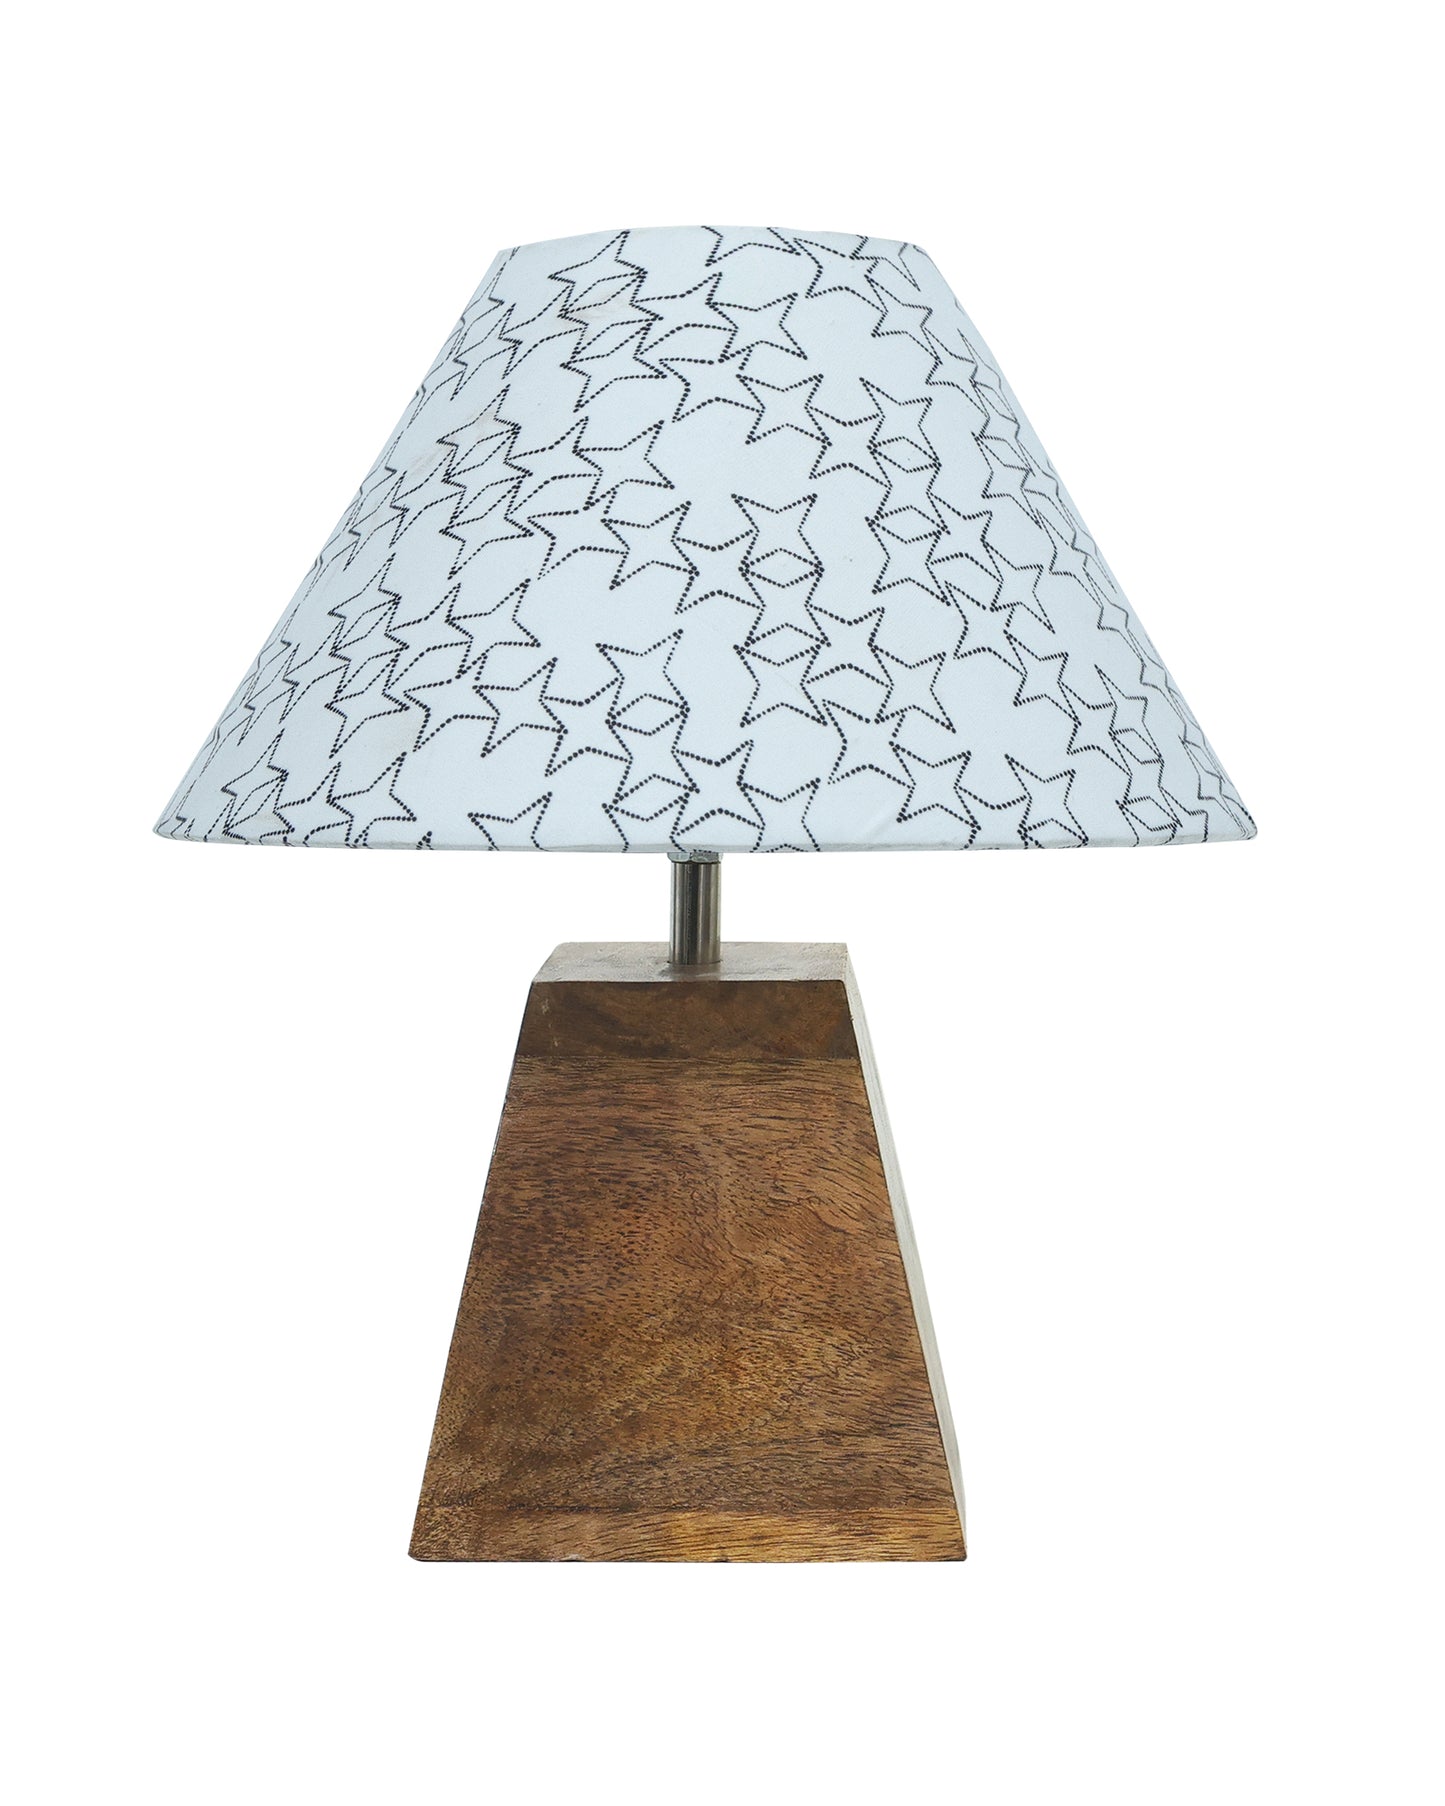 Pyramid Modern Table Lamp, Wooden Base Modern Fabric Lampshade for Home Office Cafe Restaurant, Cone